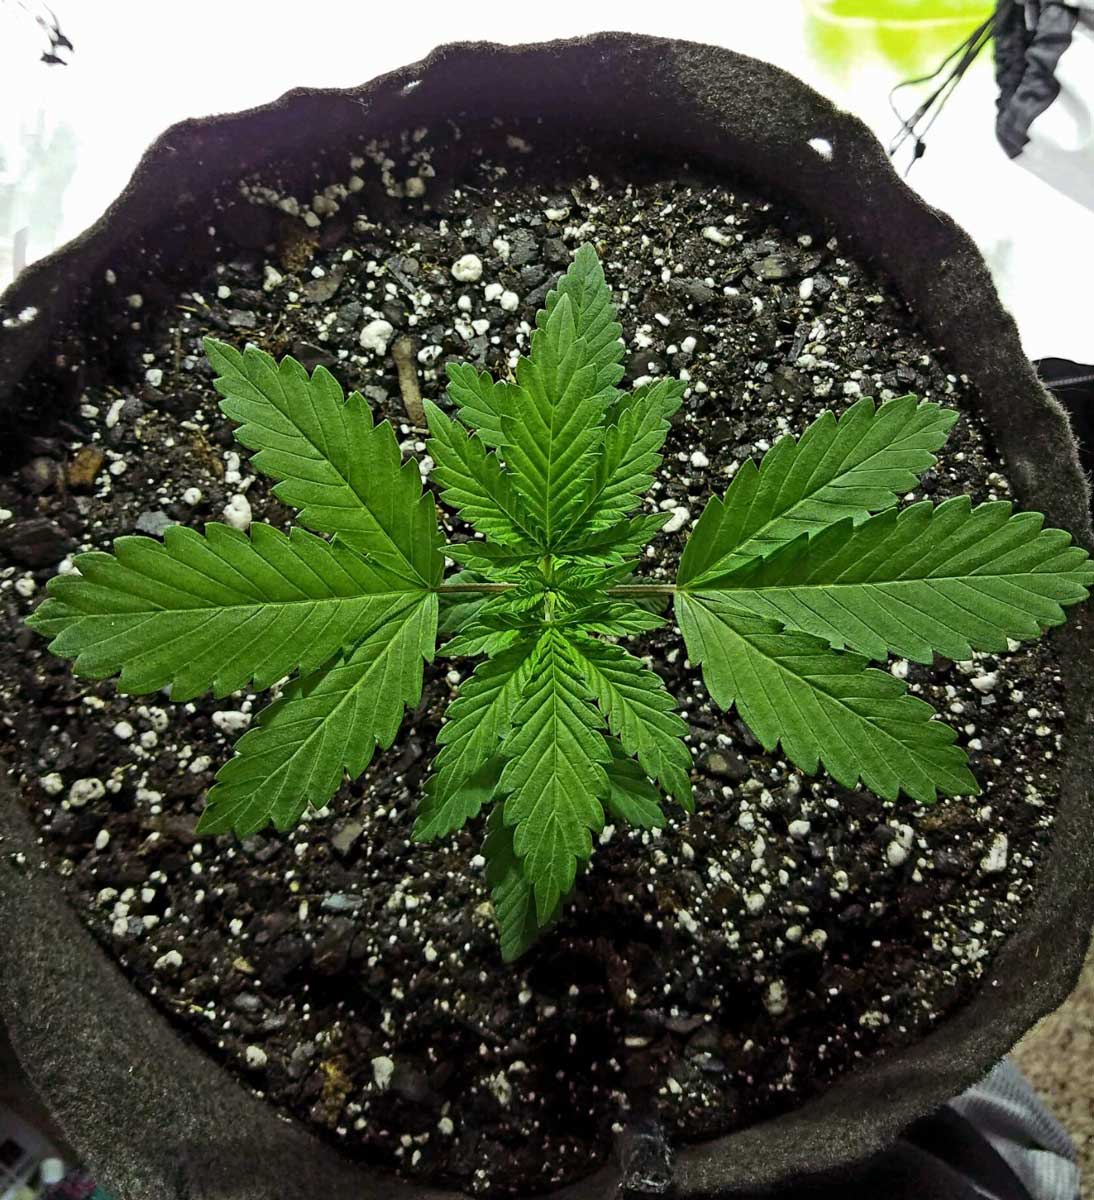 Image of Weed plants growing in soil that has been amended with azomite